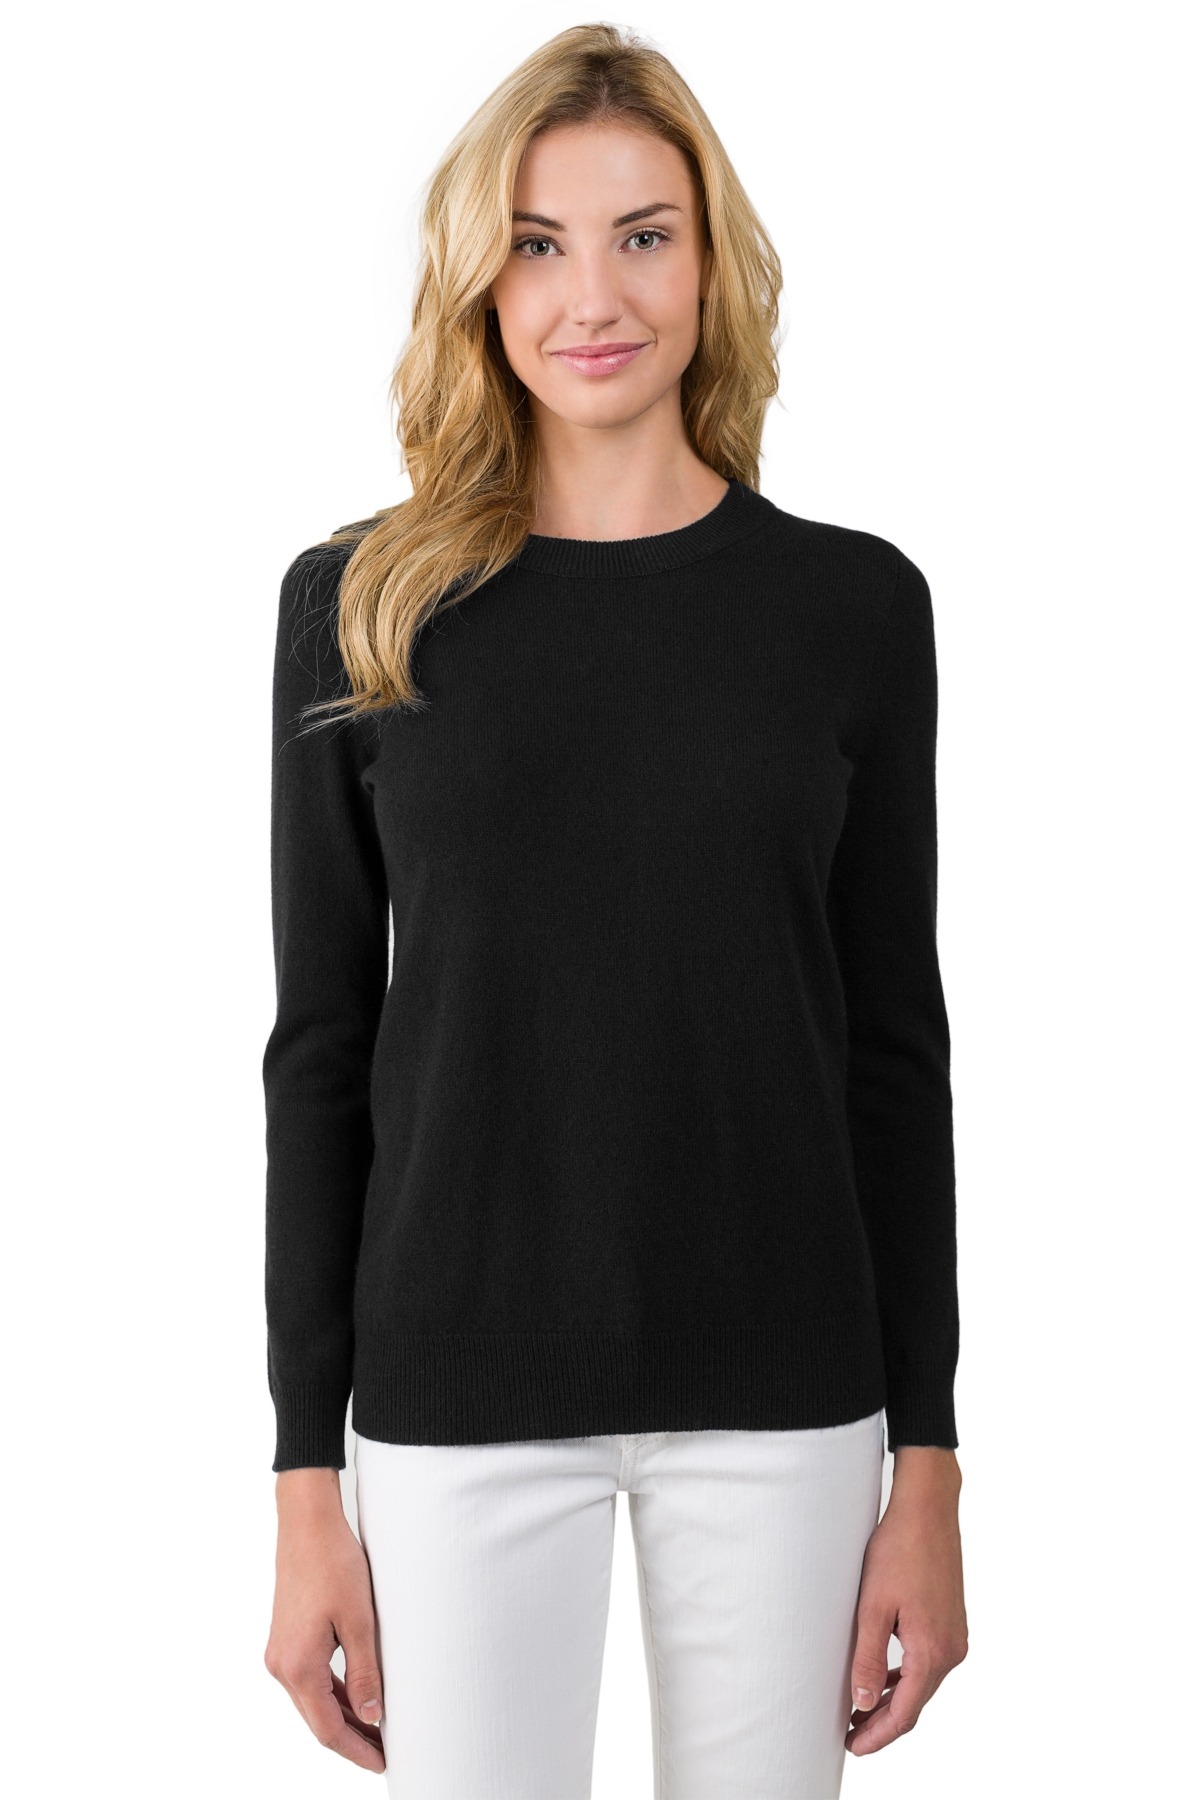 Women's 100% Pure Cashmere Long Sleeve Crew Neck Pullover Sweater (1362, Lime, Large ) - Orchid